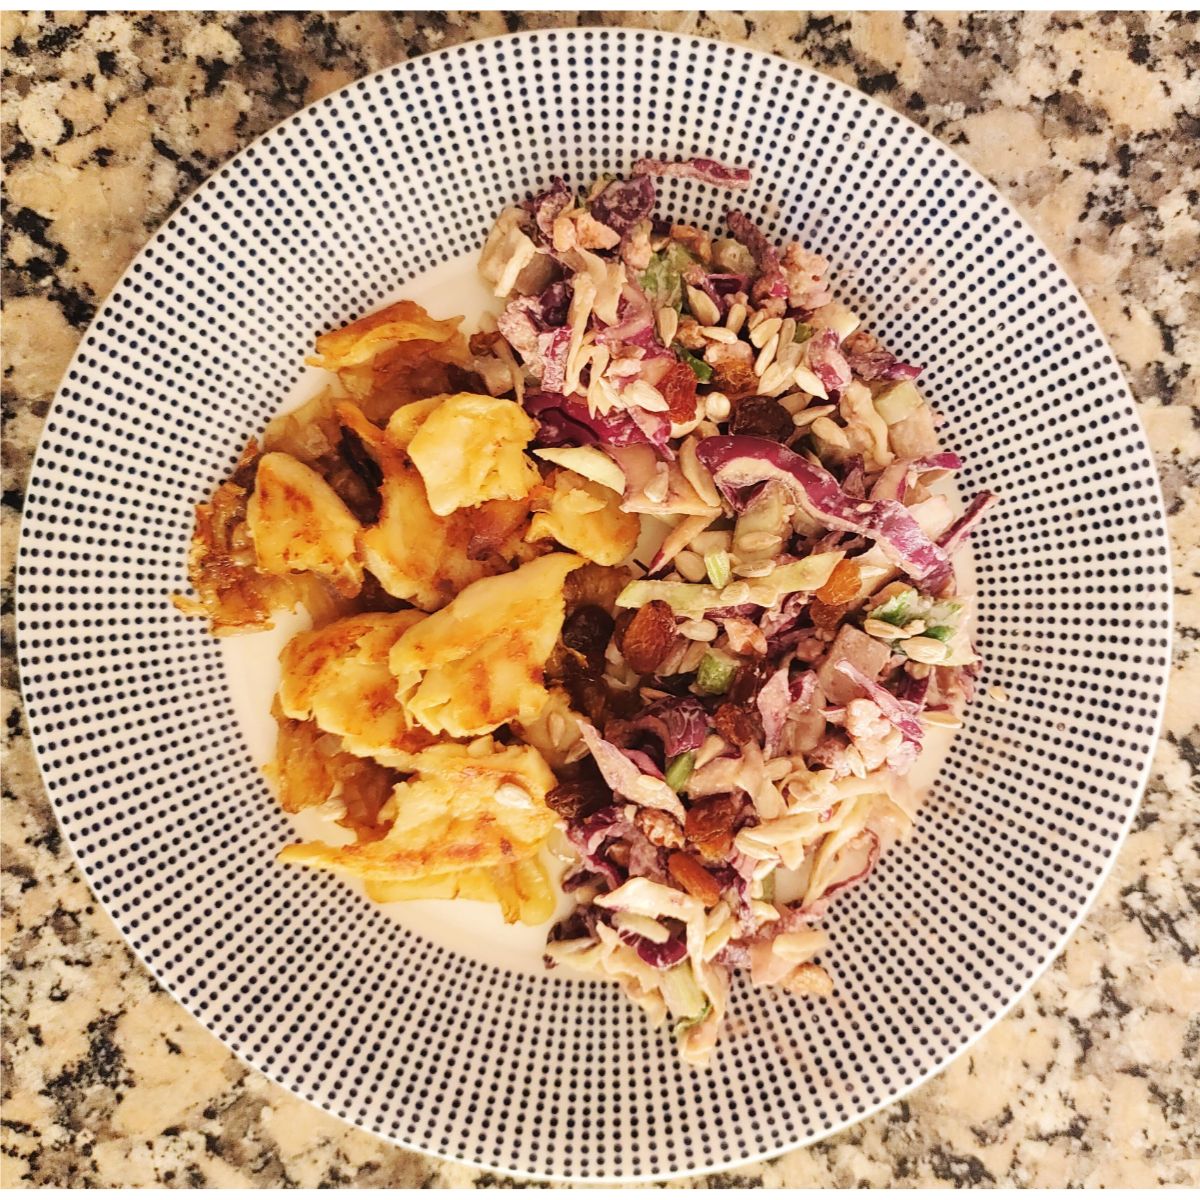 caramelised onions with vegan waldorf salad and heura chicken